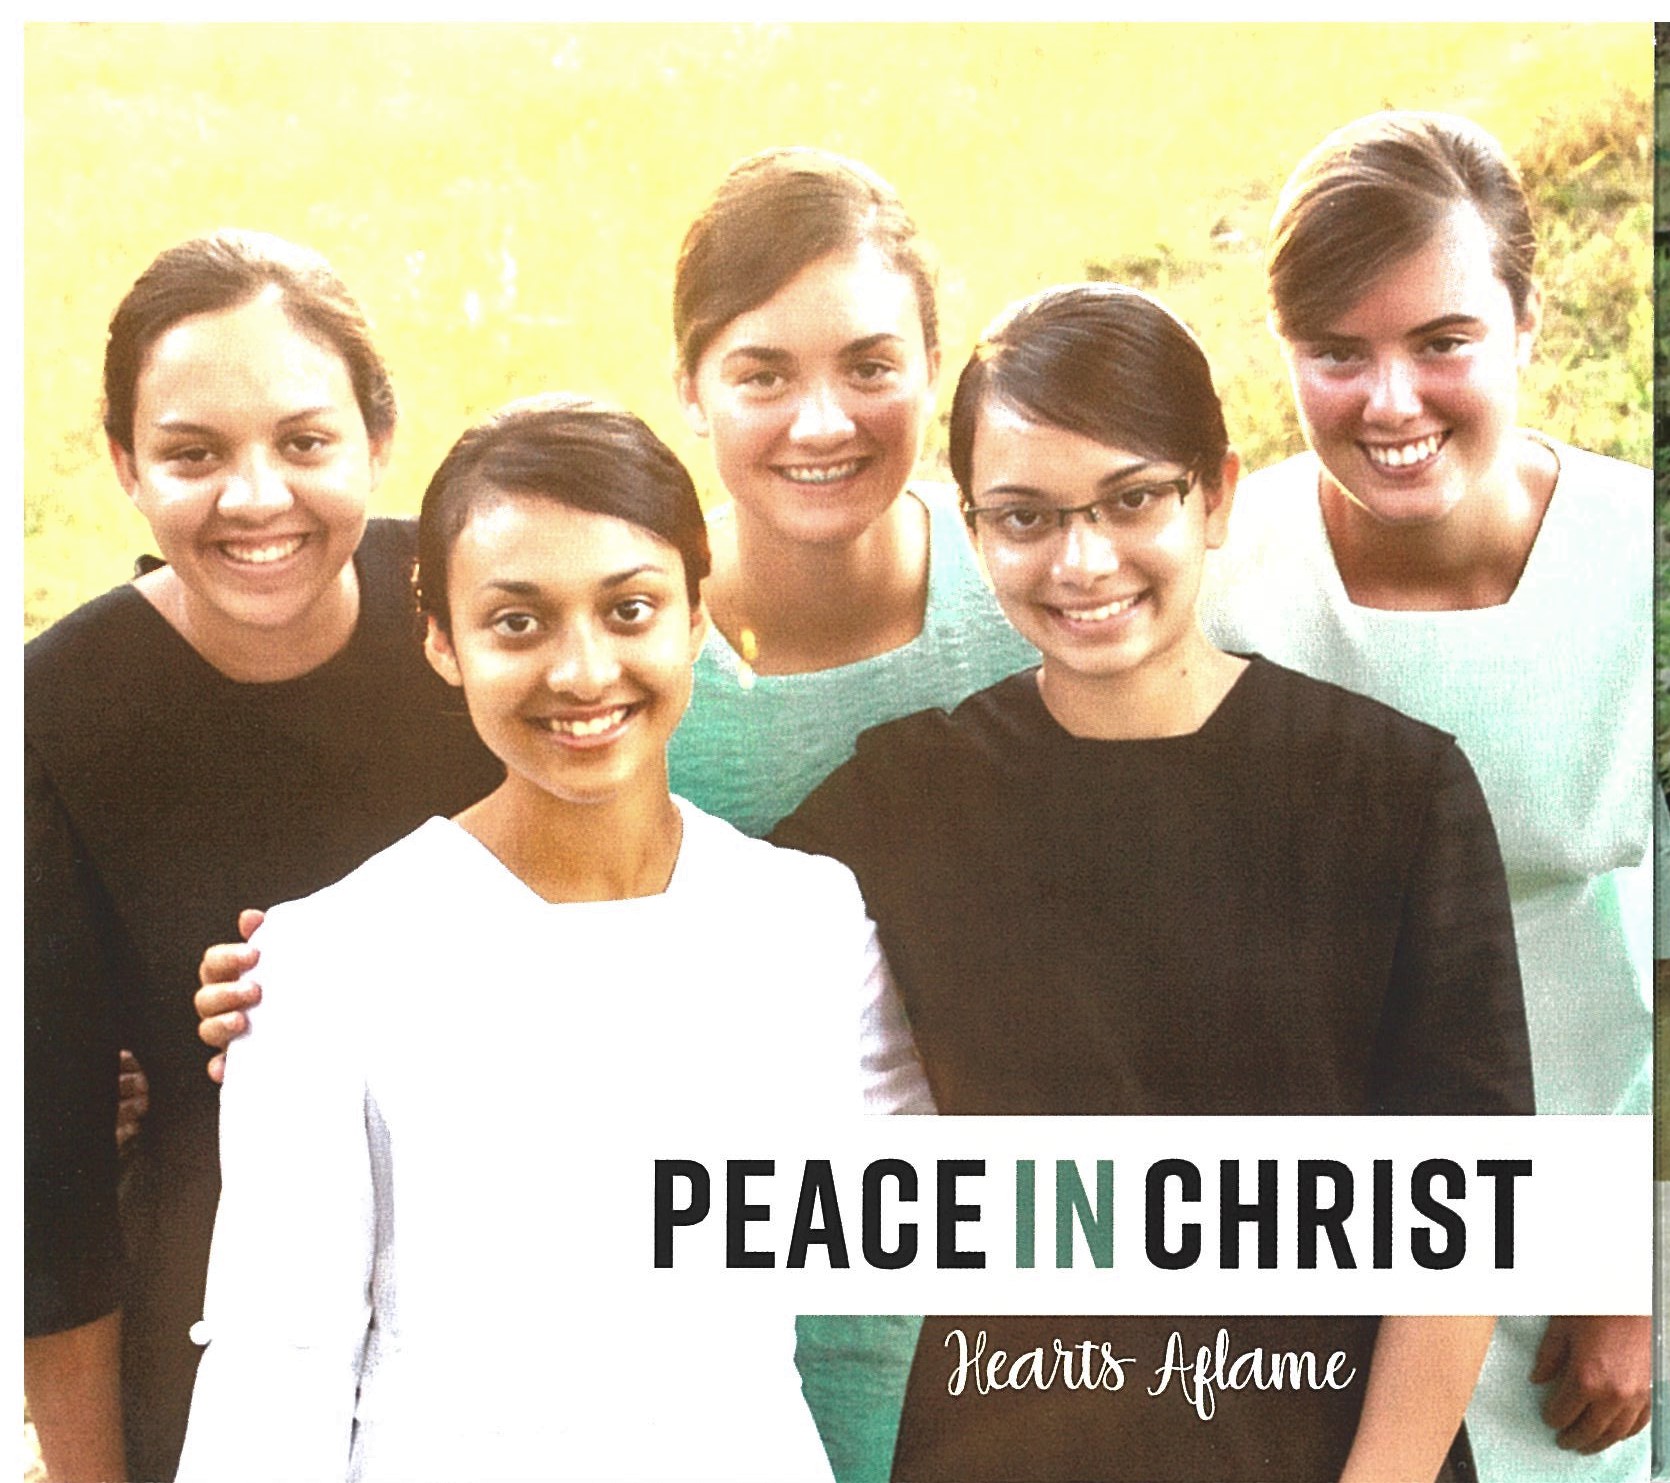 PEACE IN CHRIST Hearts Aflame